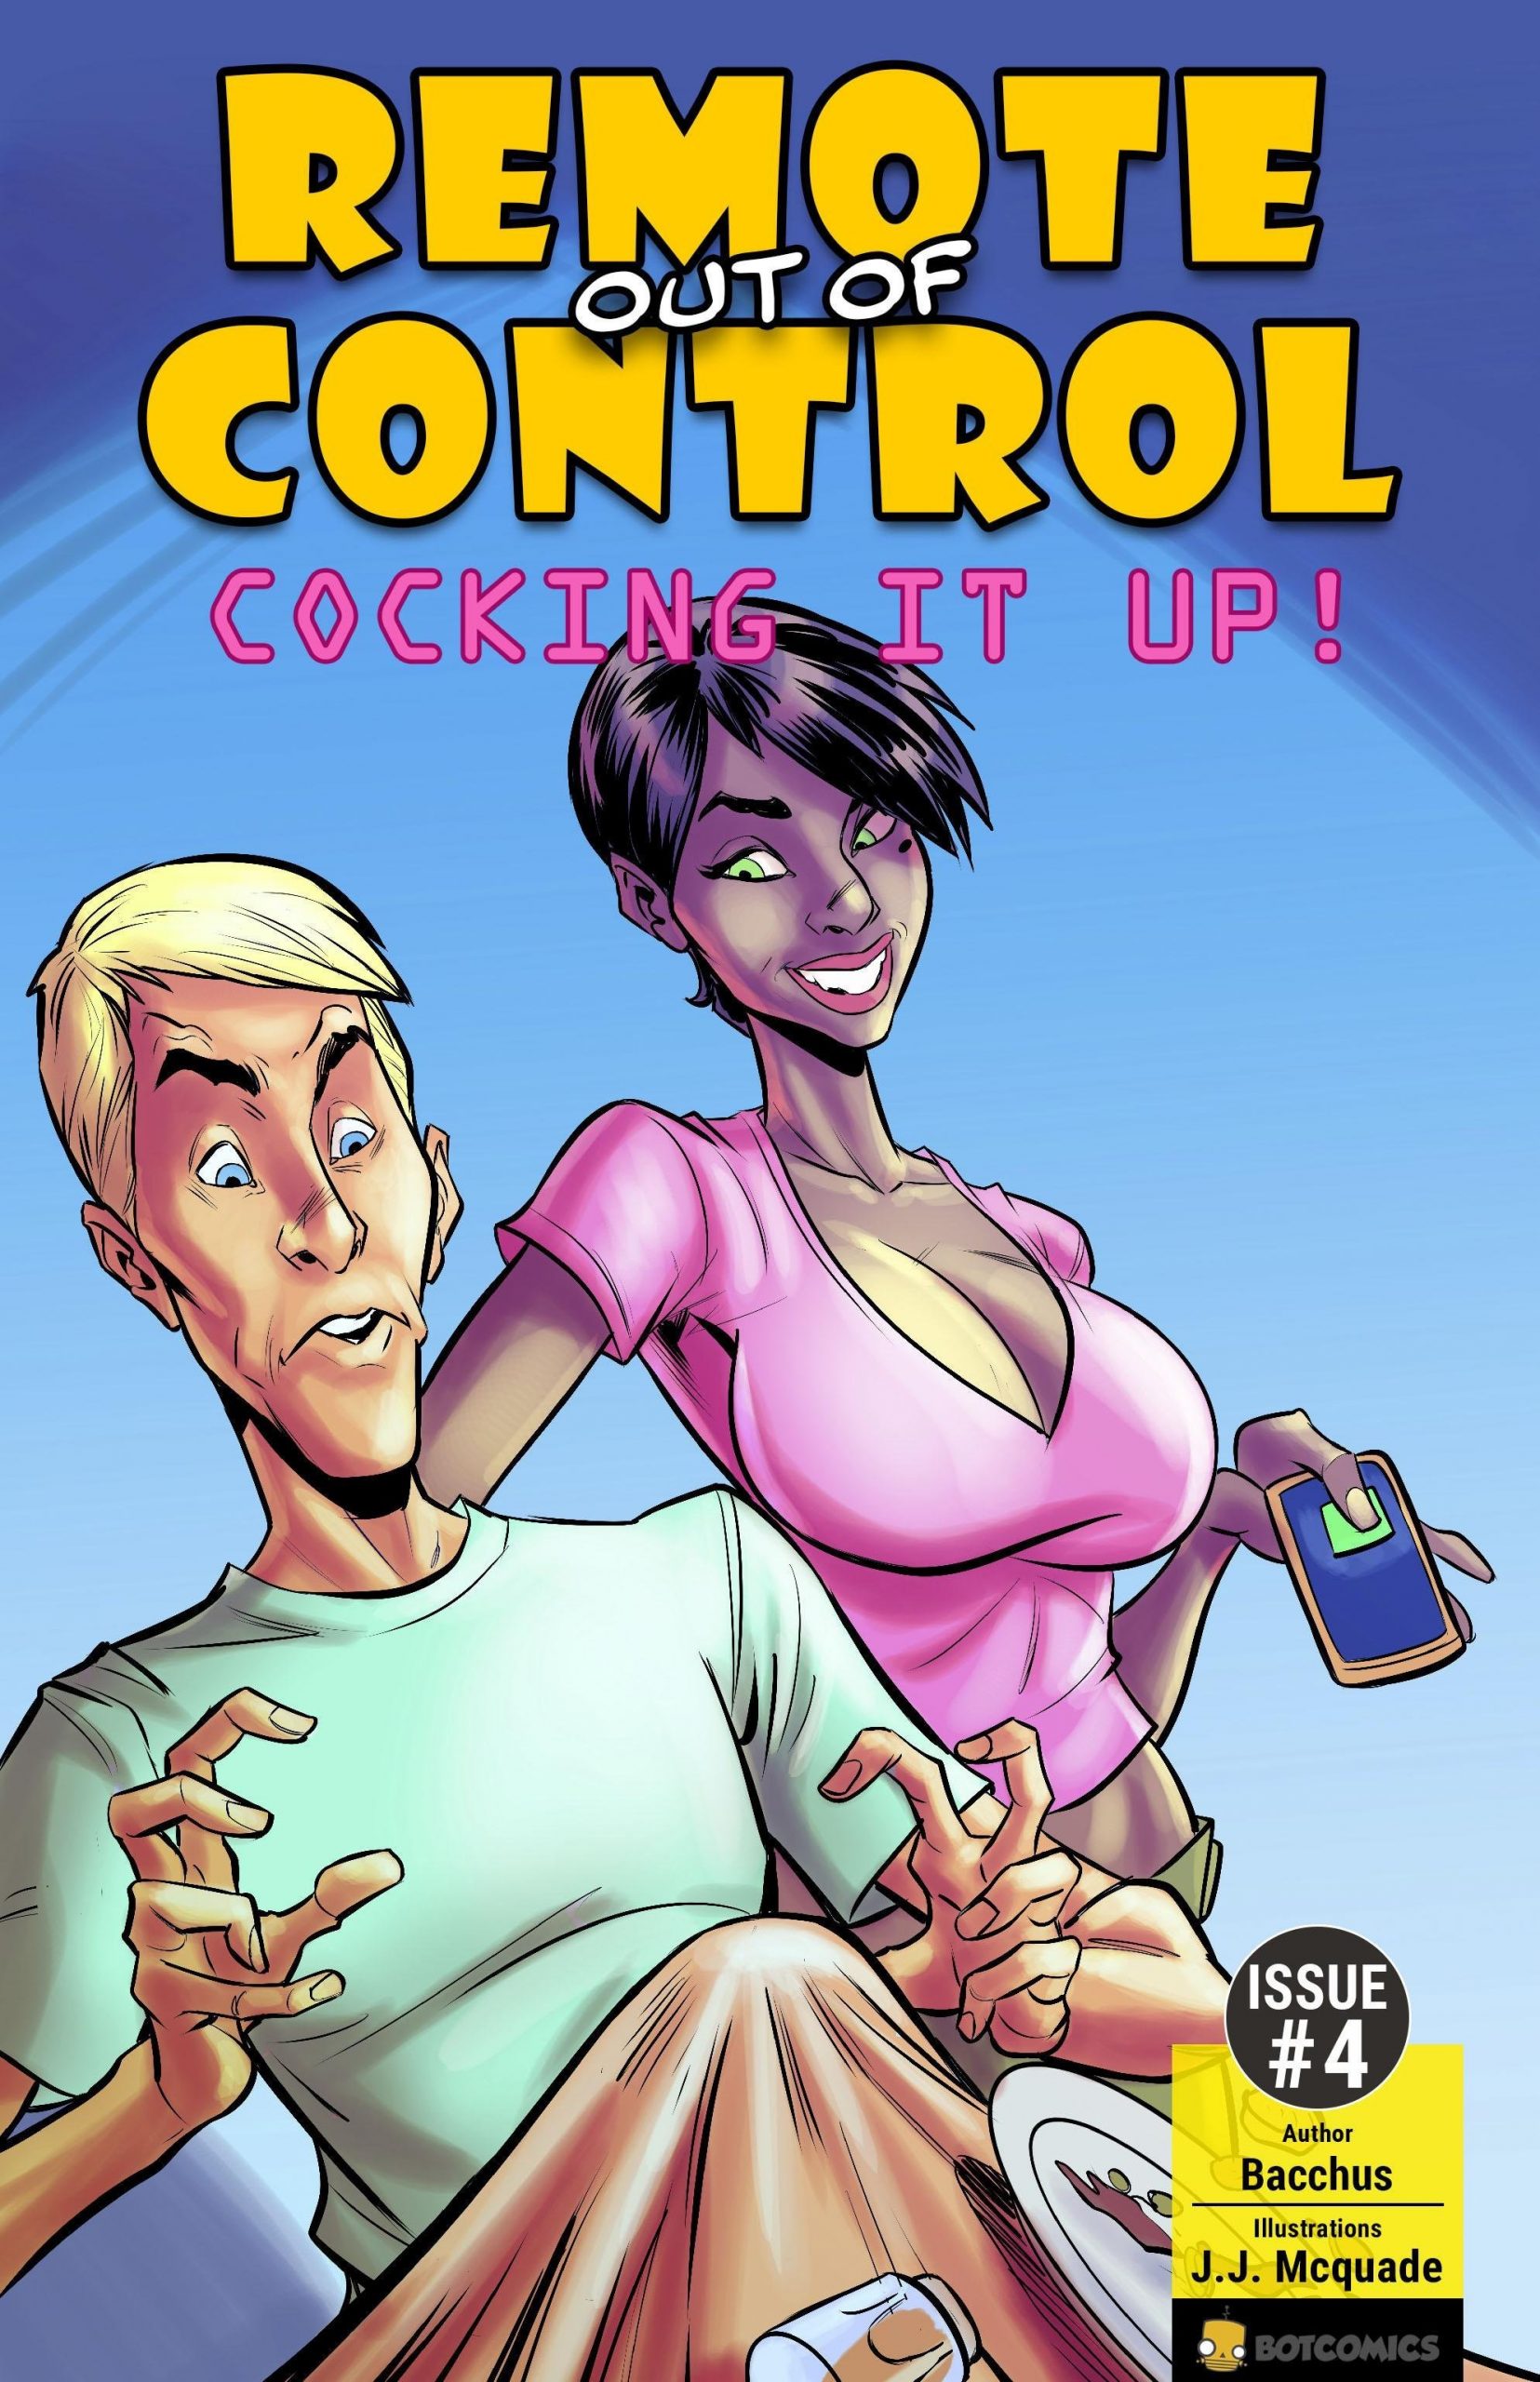 Remote out of control porn comic